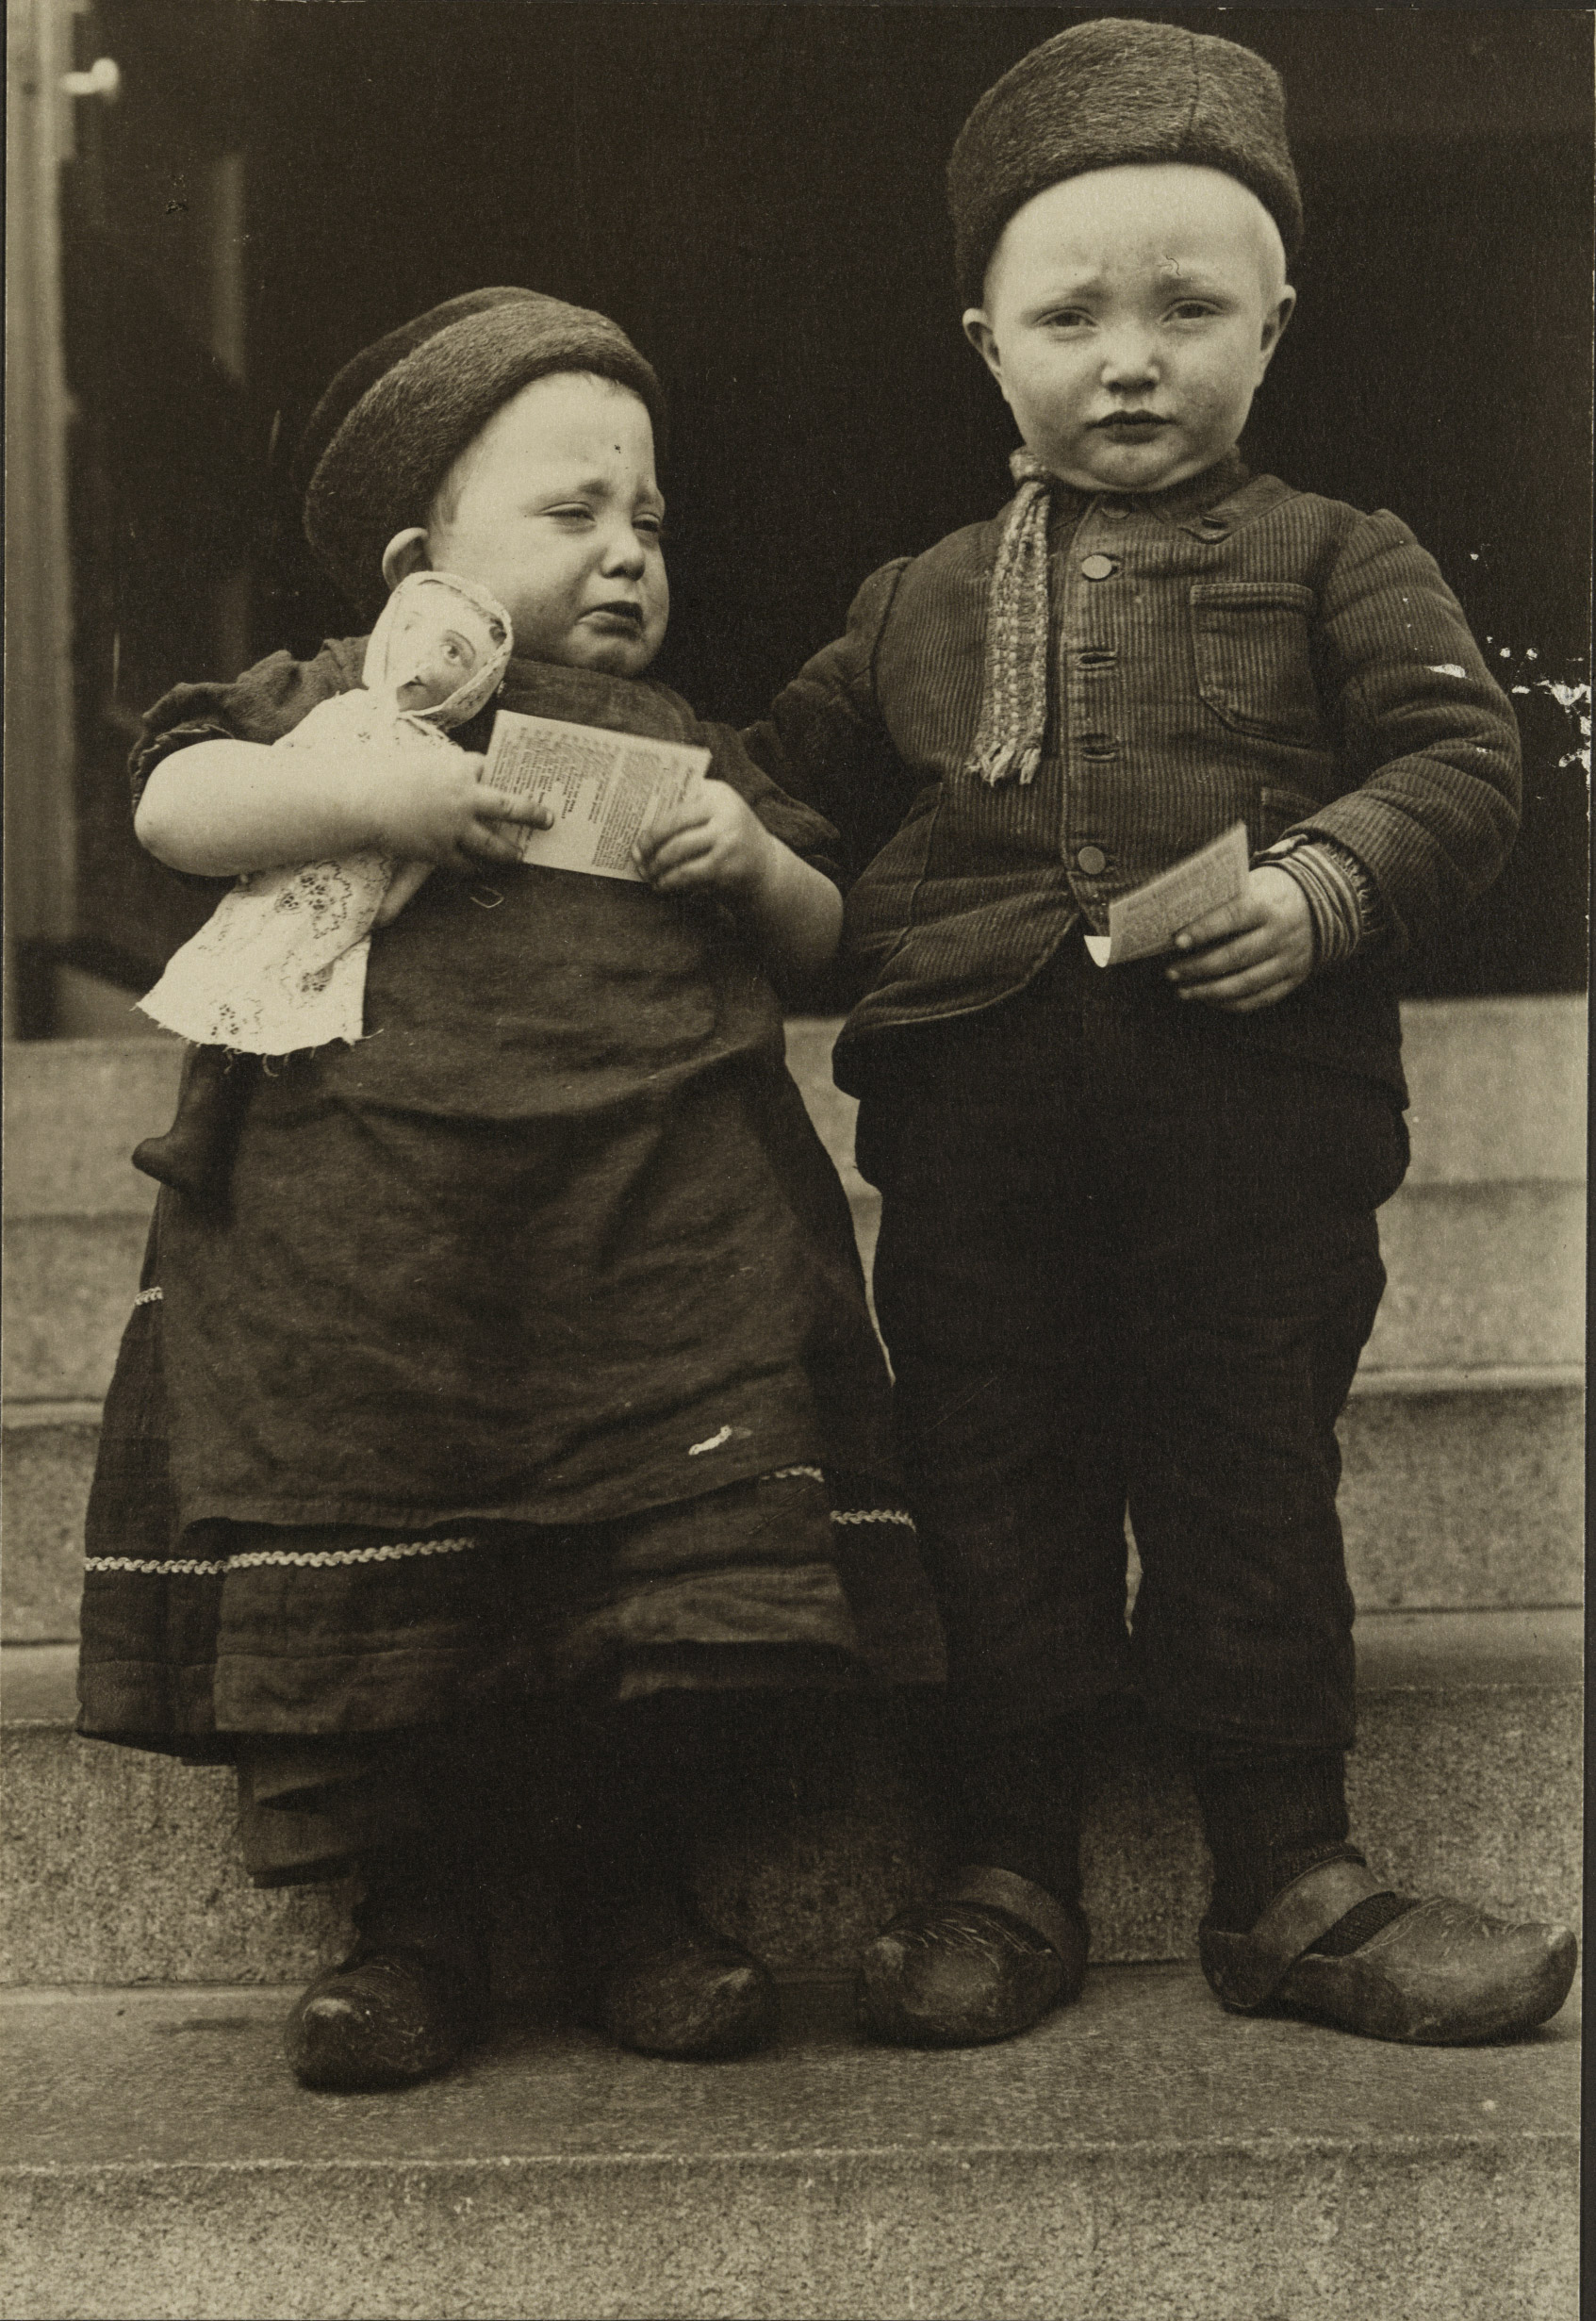 Portrait of Dutch siblings at the Ellis Island Immigration Station, circa 1905.